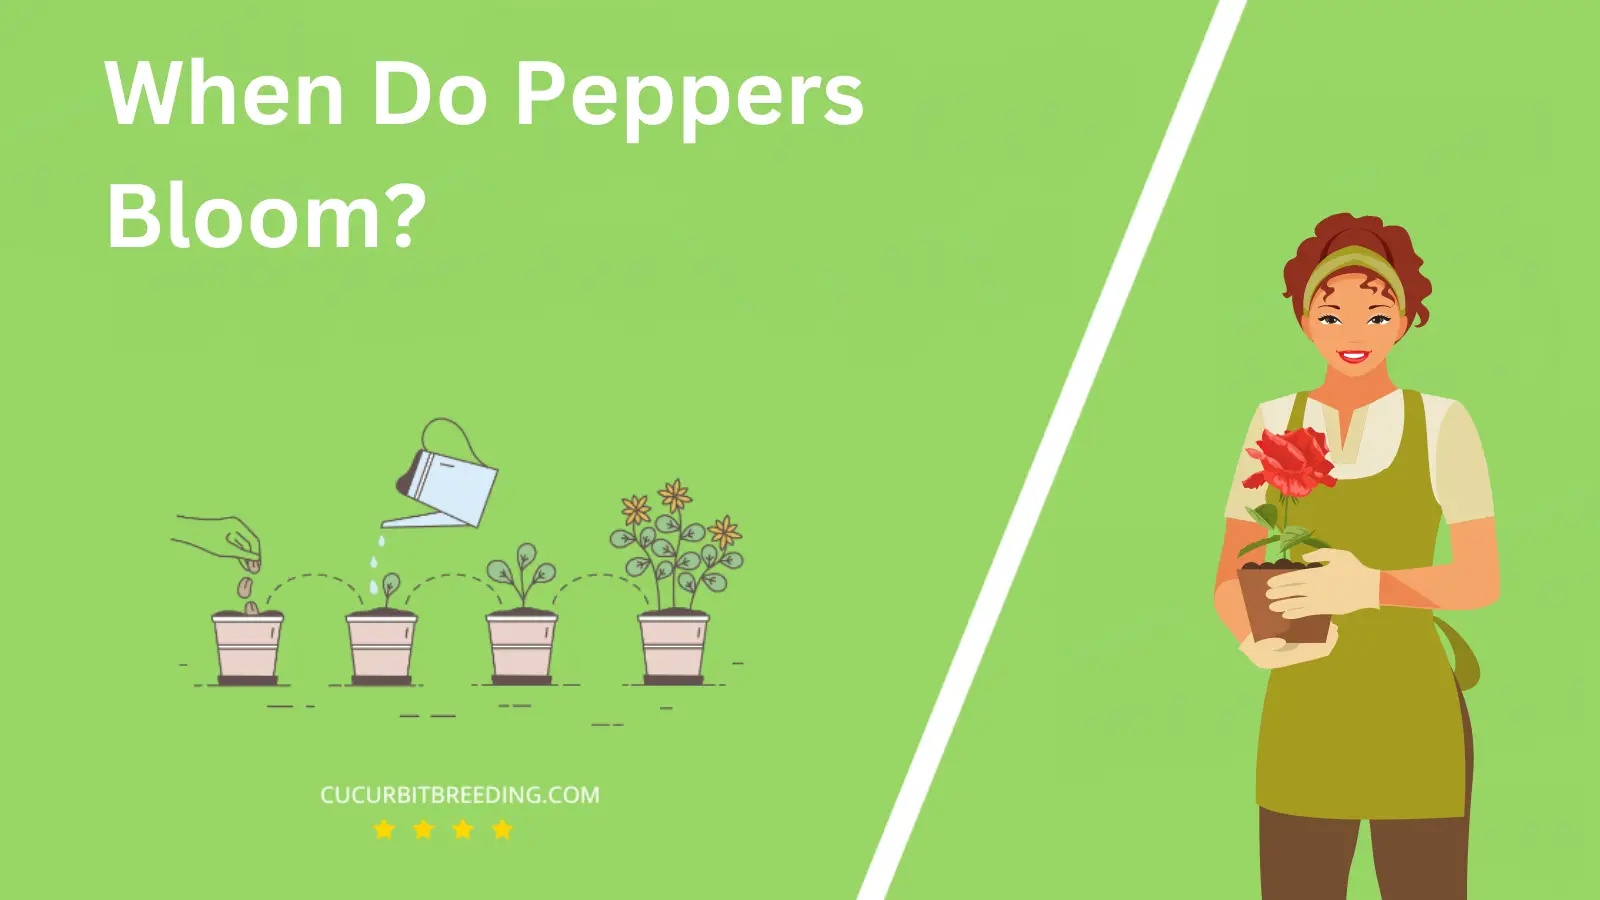 When Do Peppers Bloom?